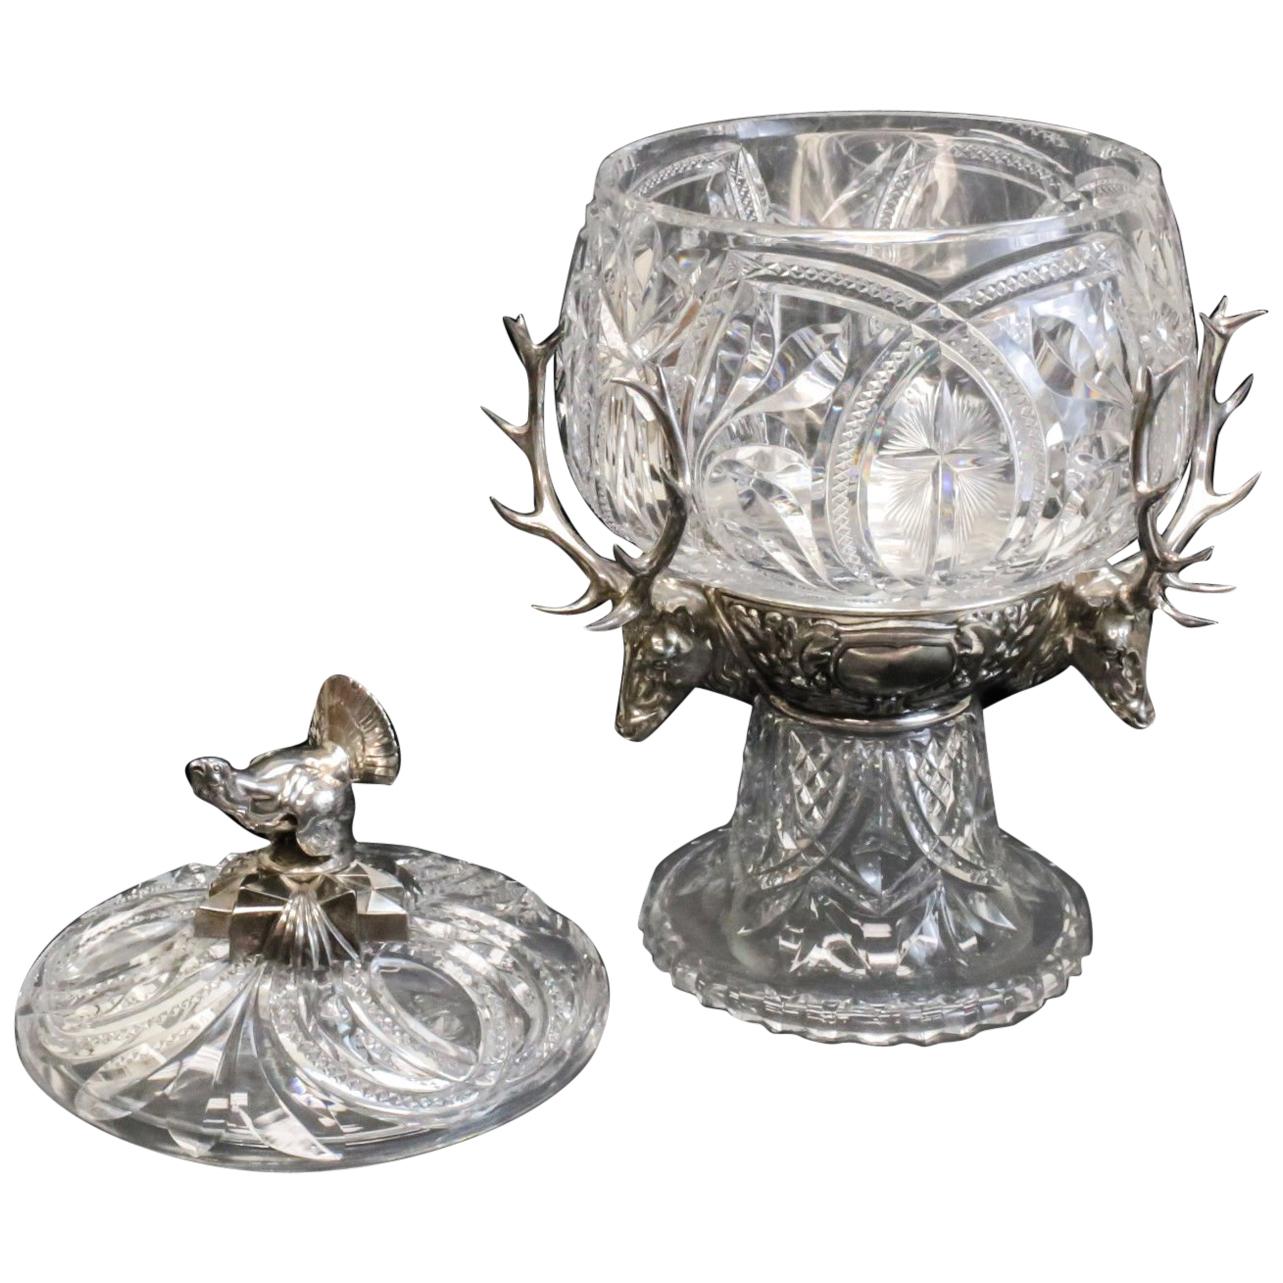 WMF Anamalier Brilliant Cut Glass & Silver Plate Centerpiece Bowl, Stags For Sale